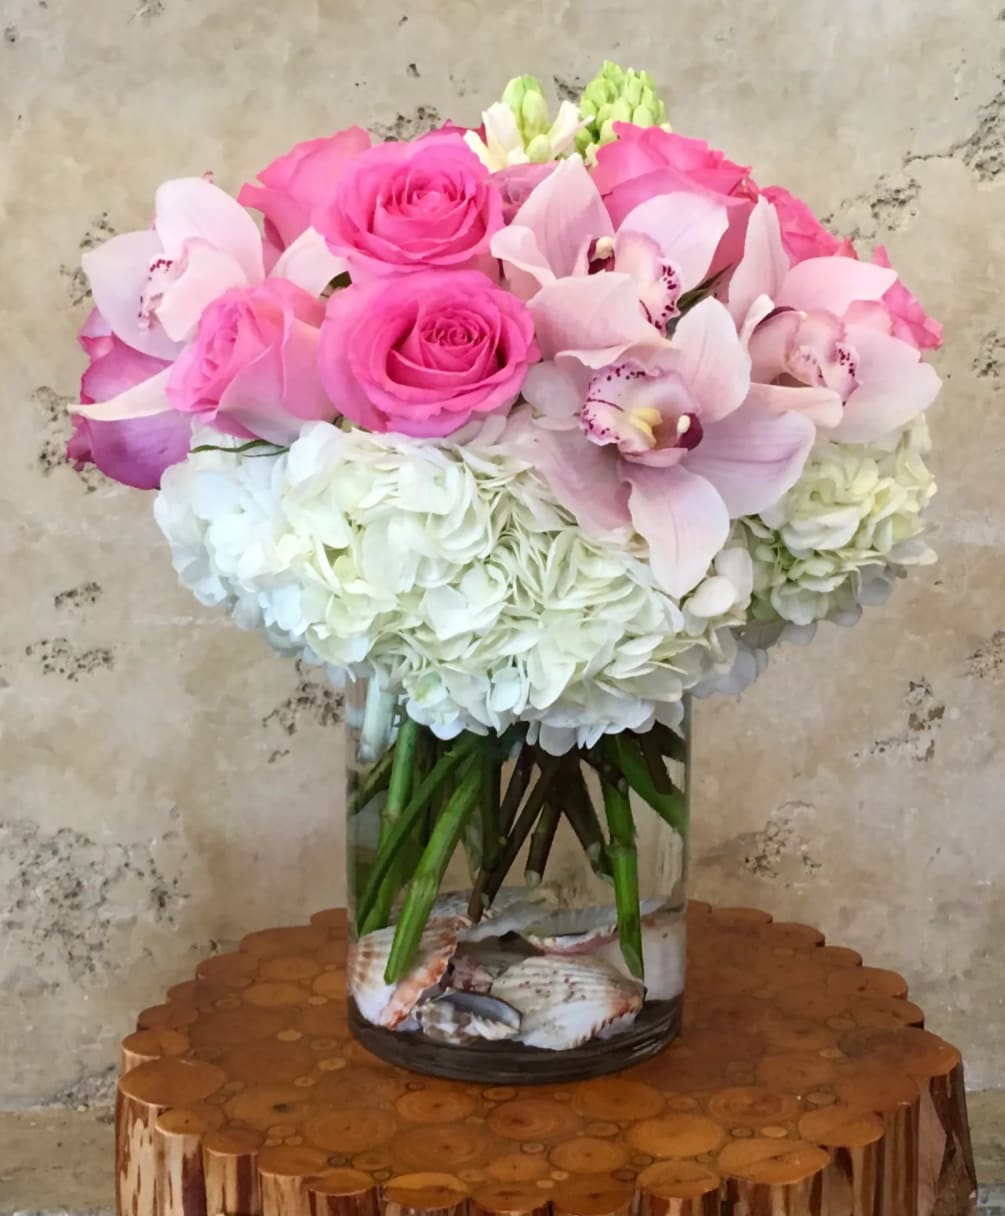 Pink Roses, Hydrangea, Cymbidium Orchid with Sea Shell in glass vase.